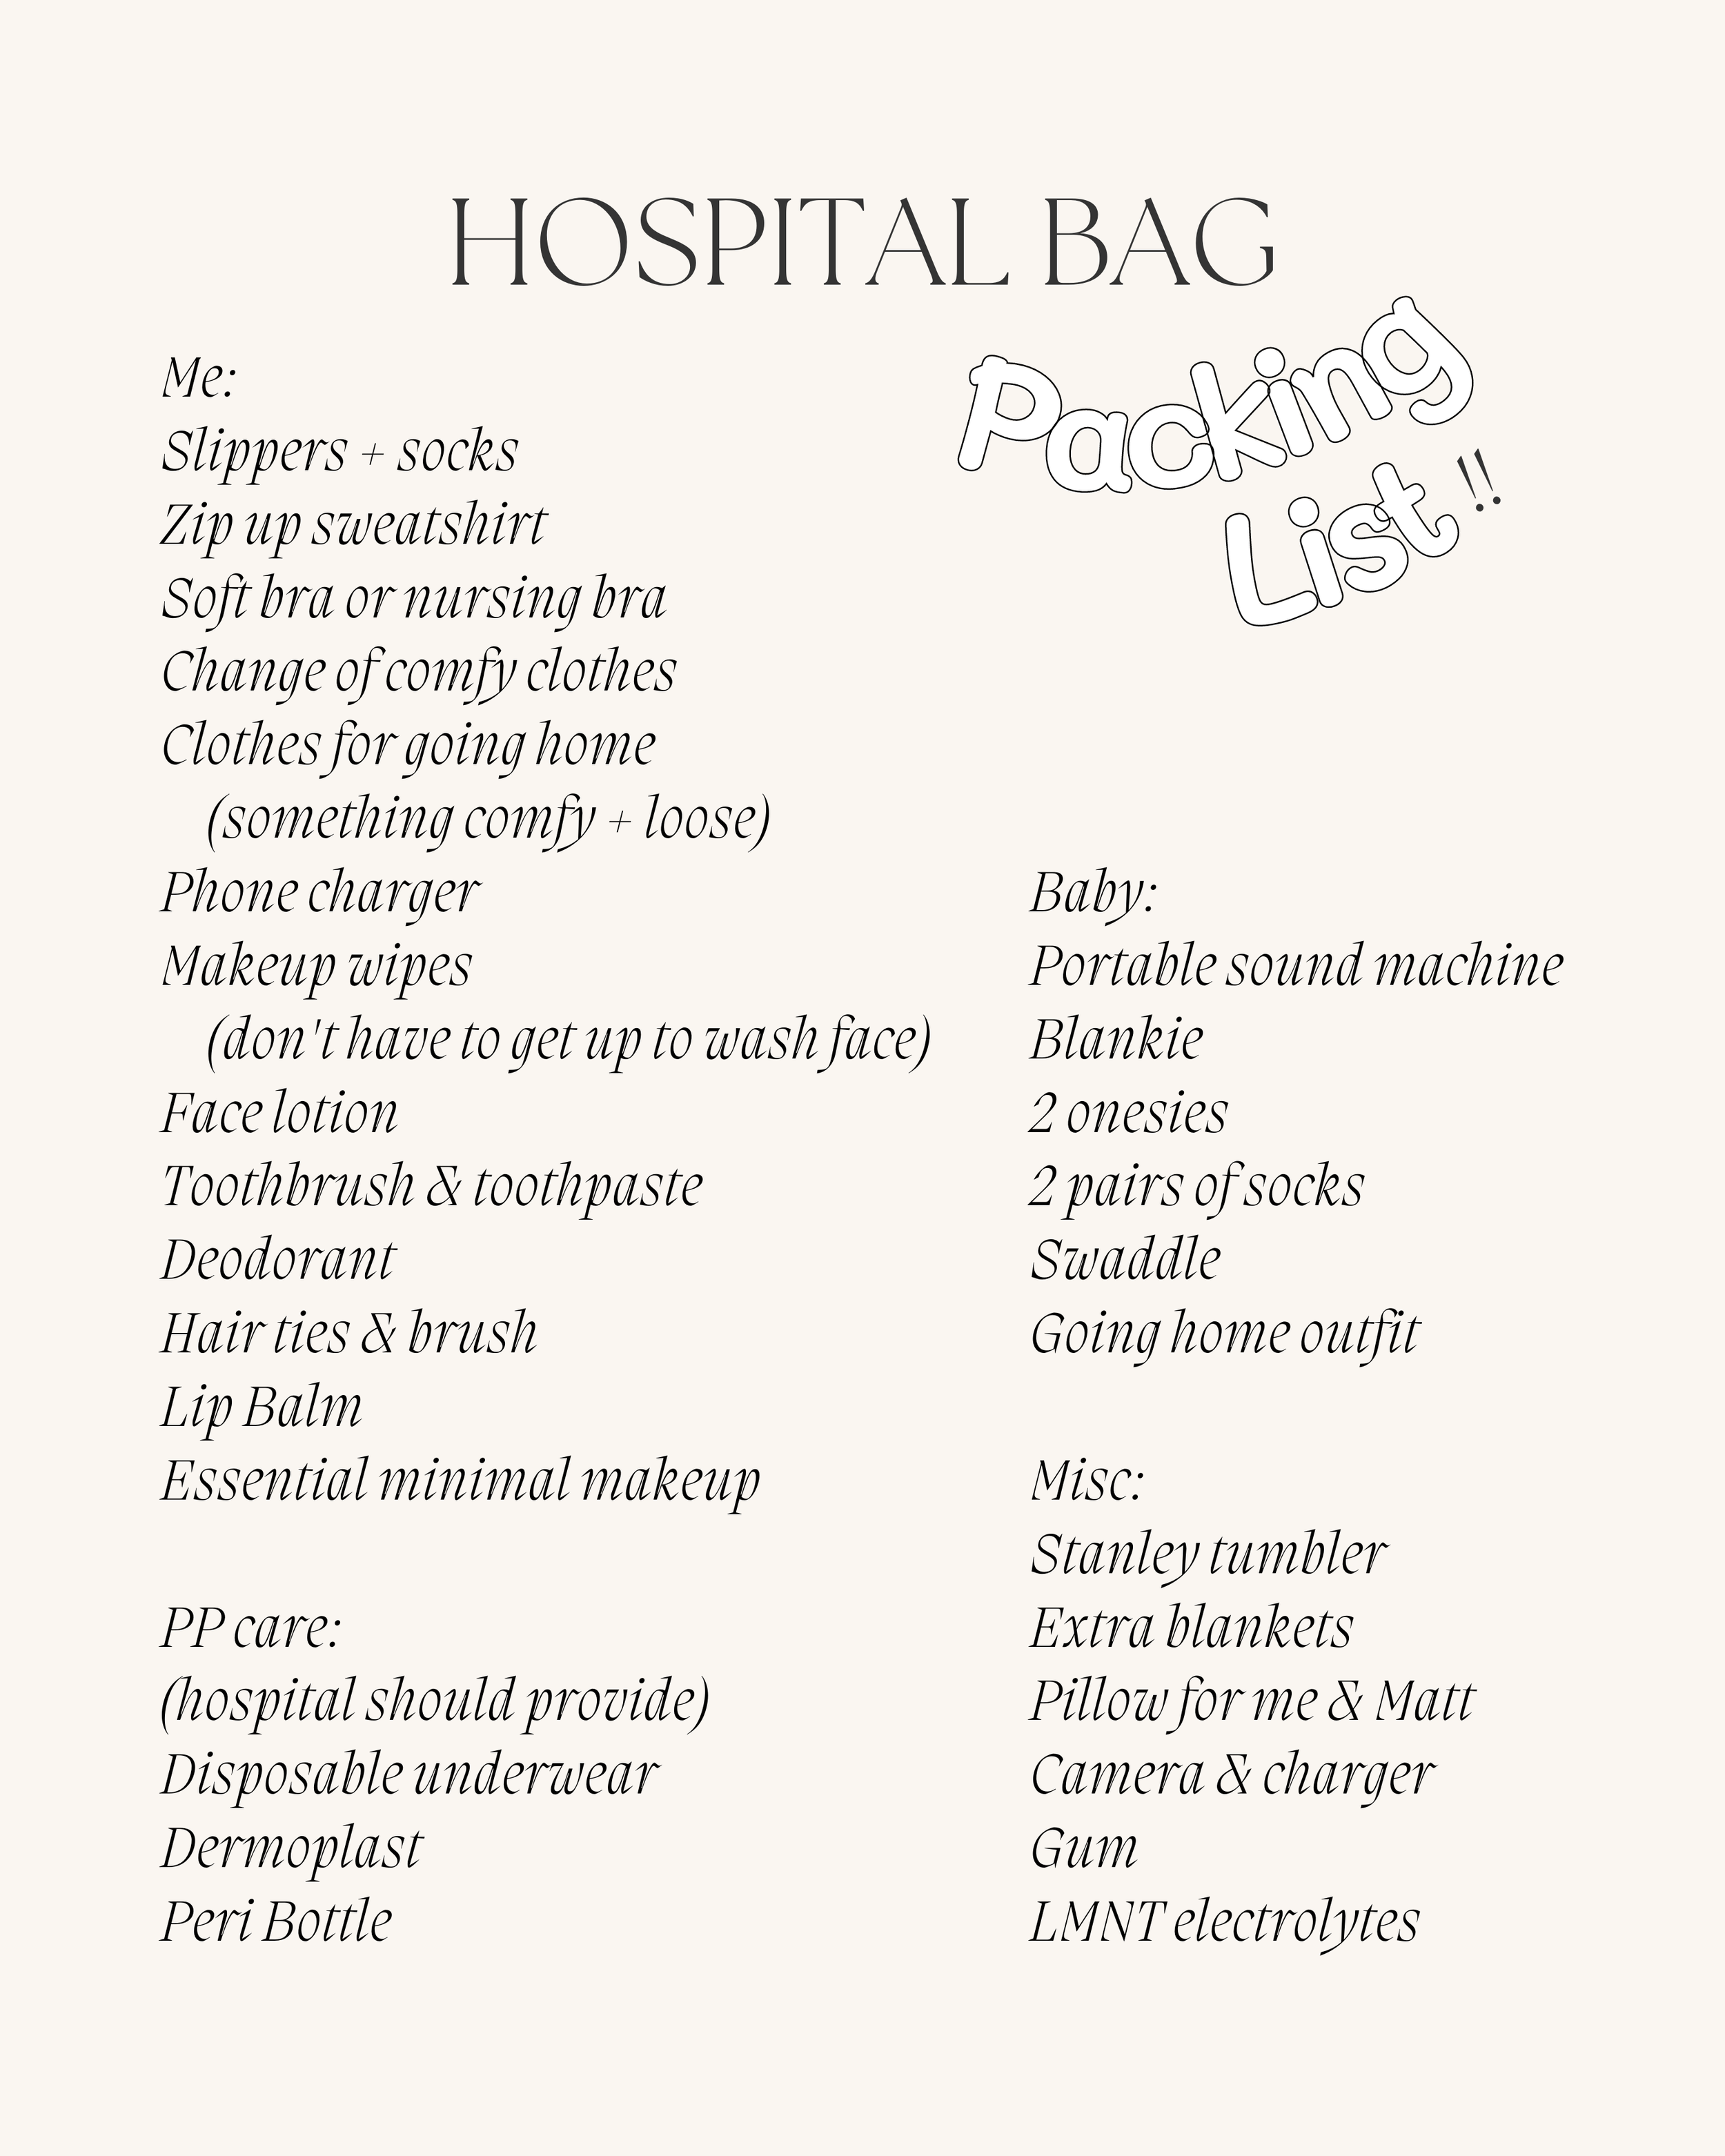 Hospital Bag Packing List - What's In My Hospital Bag For Baby #2 - bresheppard.com.png